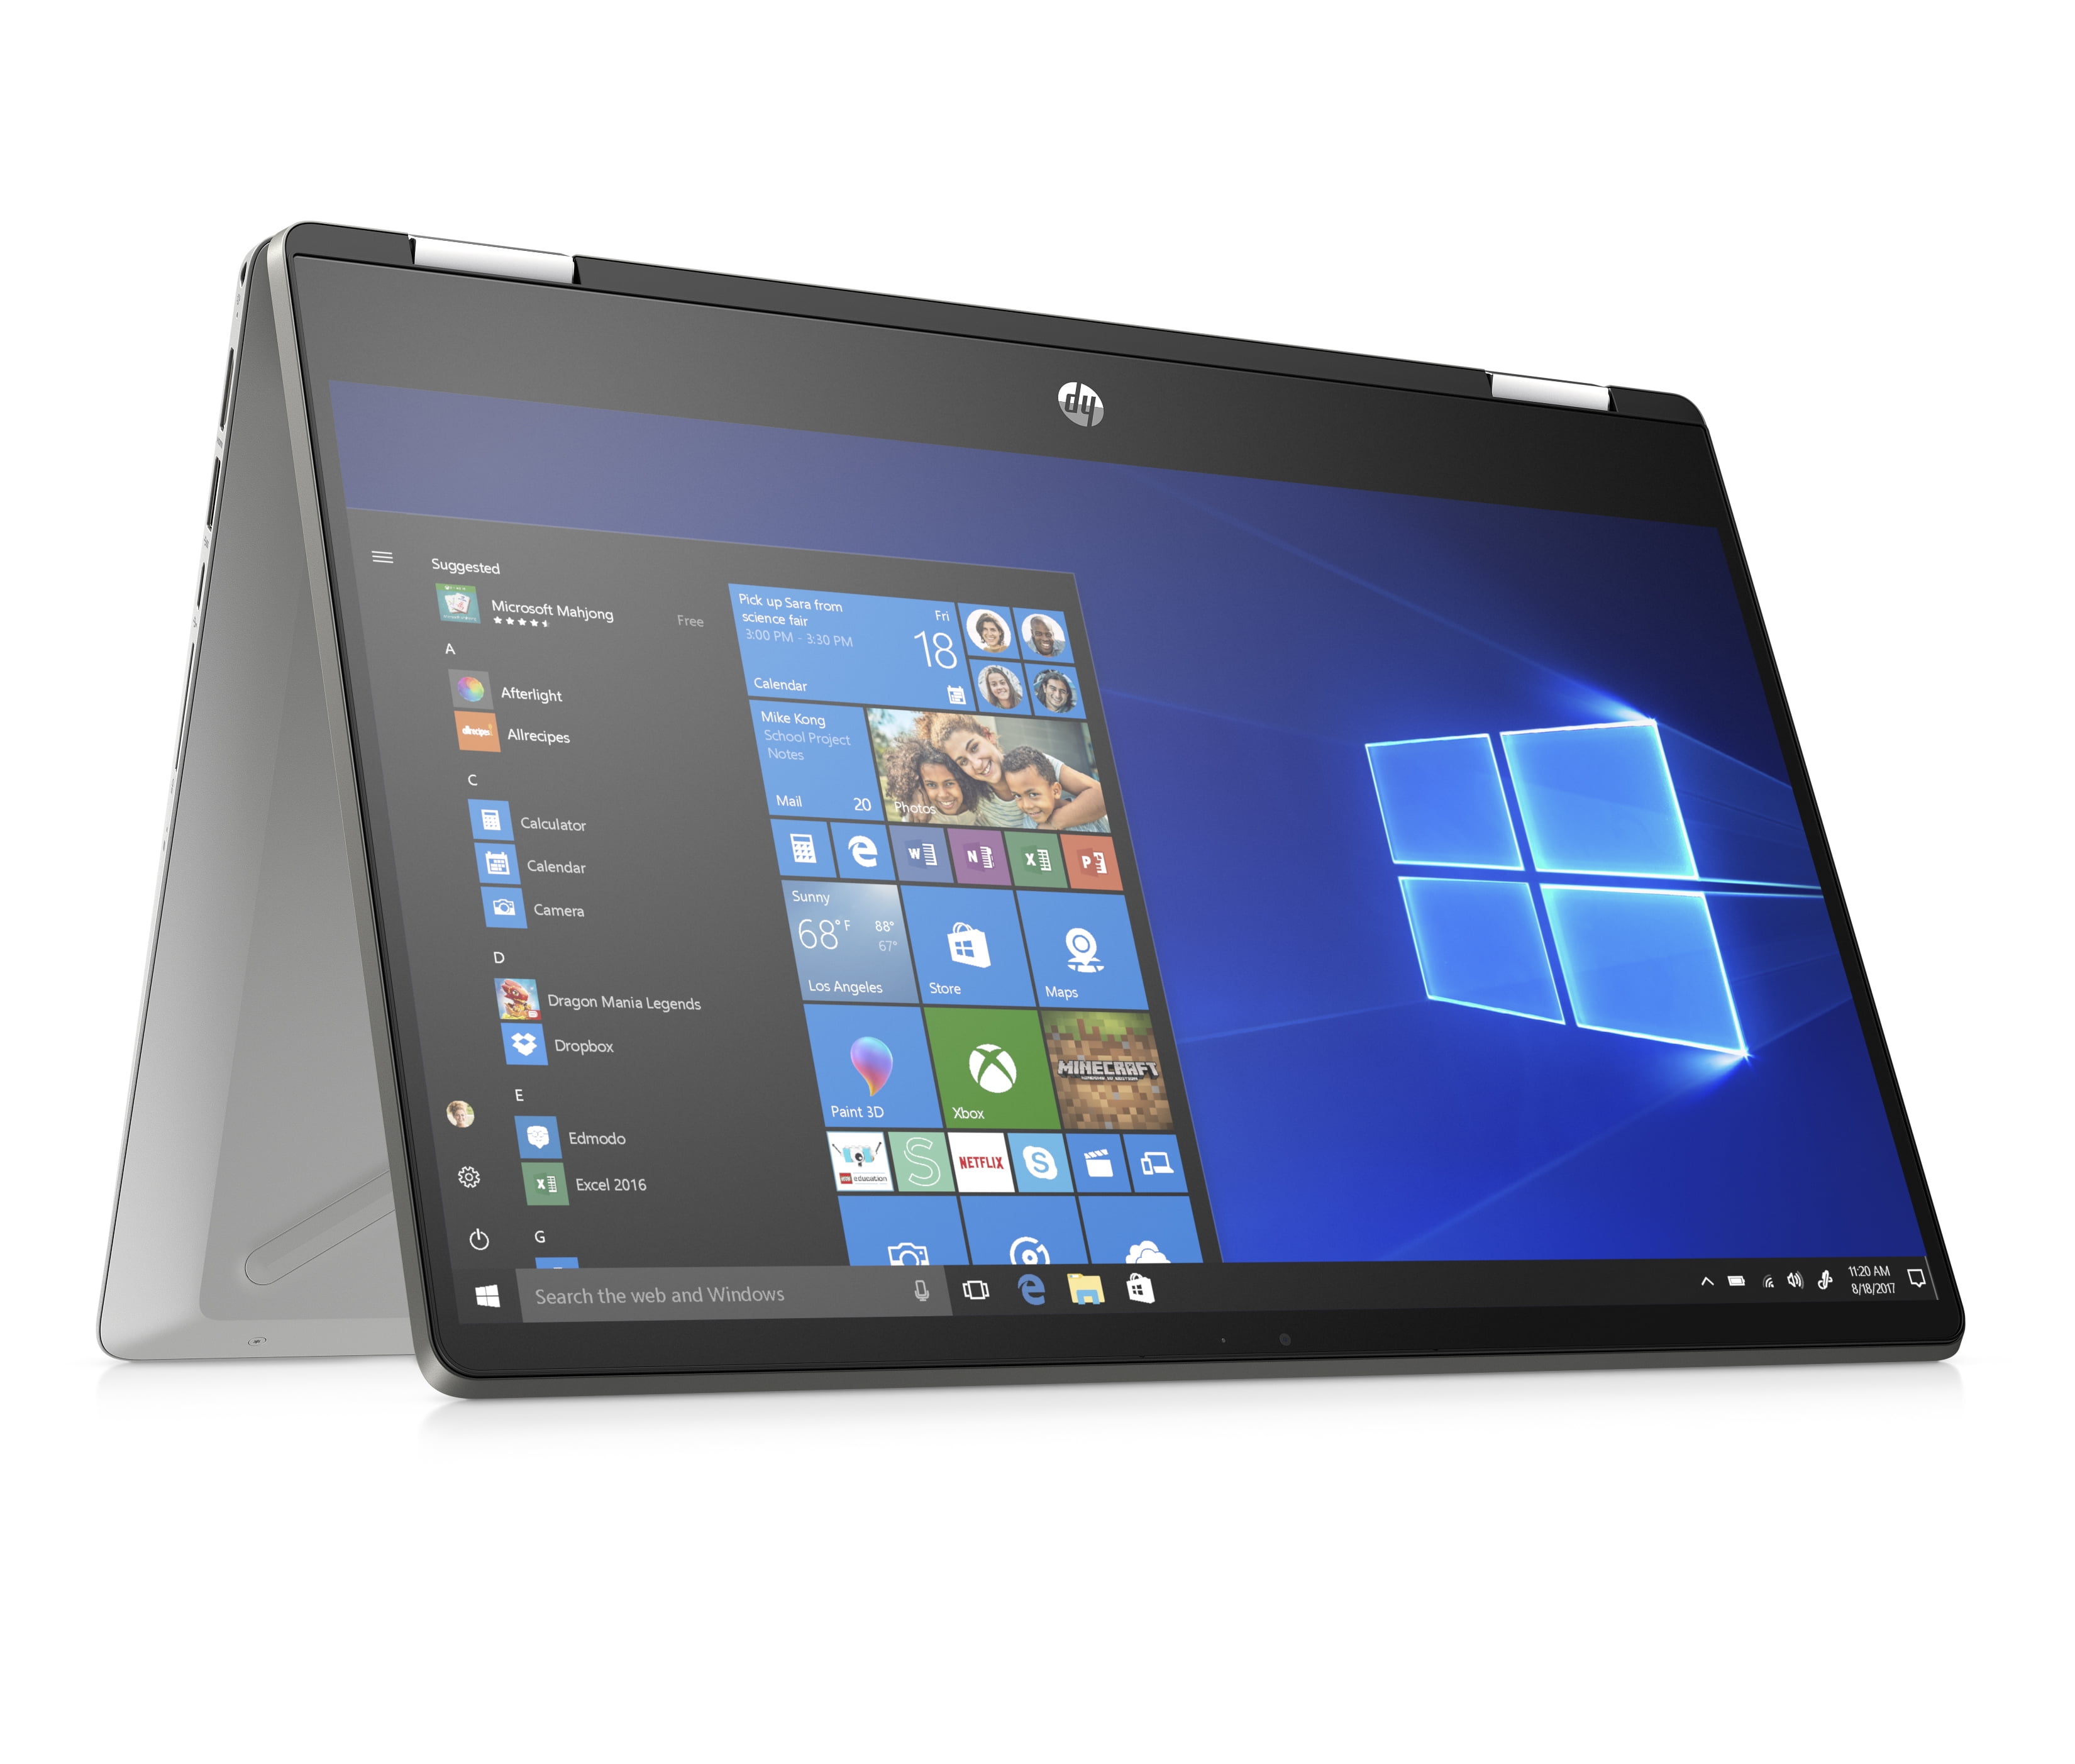 HP Pavilion x360 14 i5 2-In-1 Touch 8GB/256GB Laptop